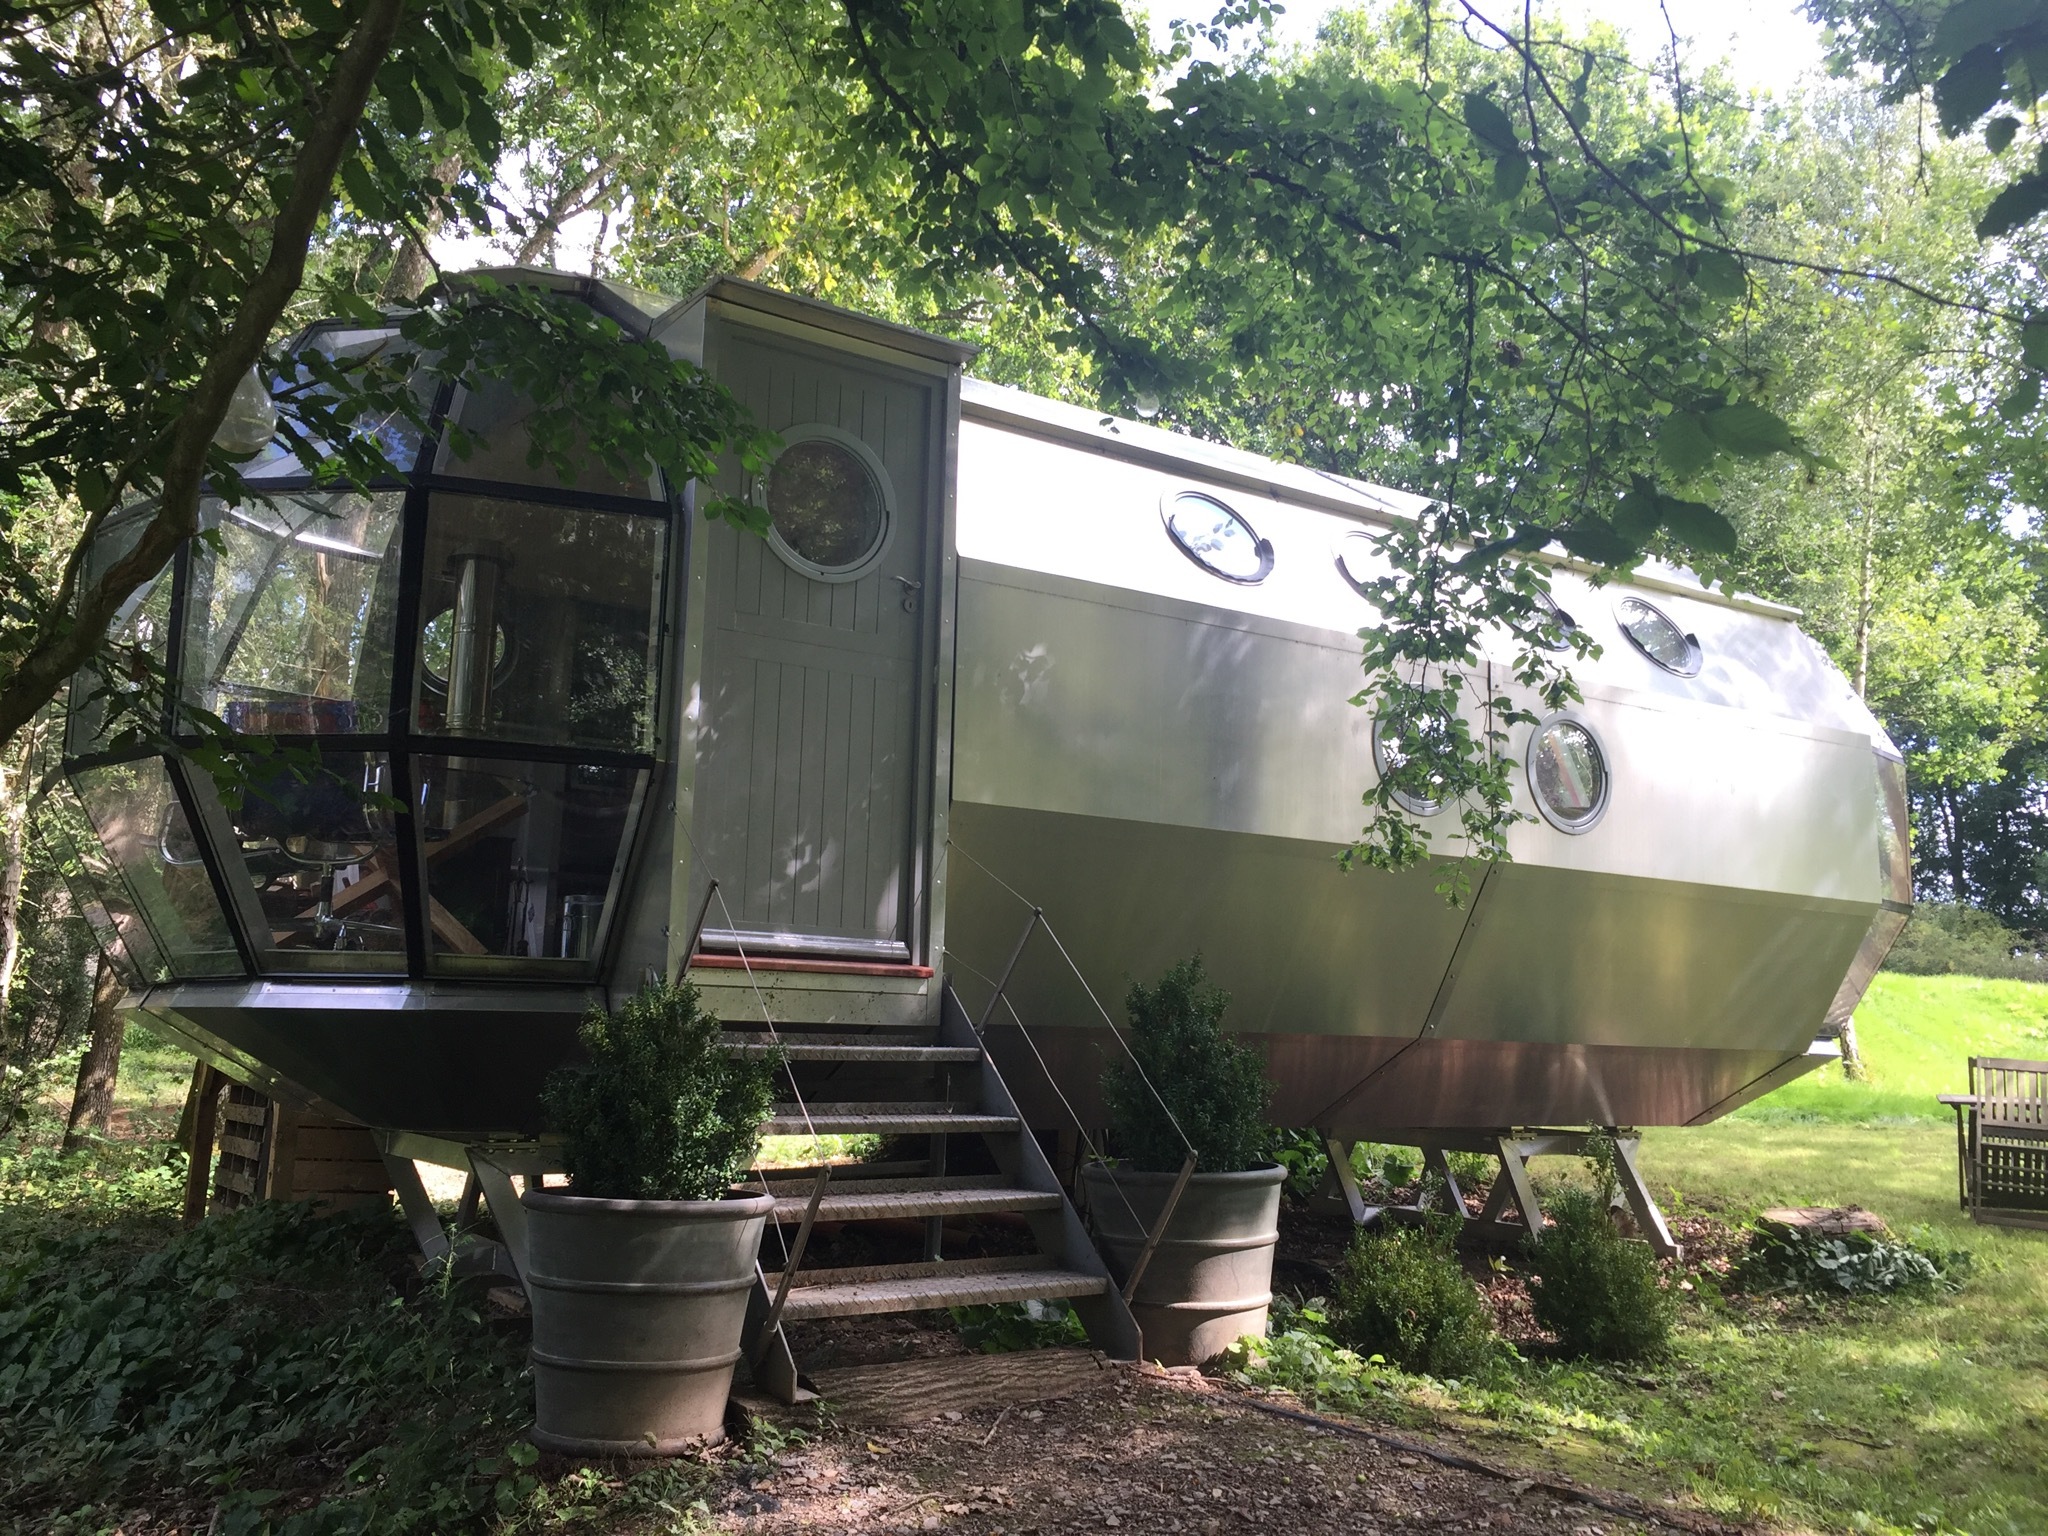 Airship 001, Sussex - Airbnb/PA